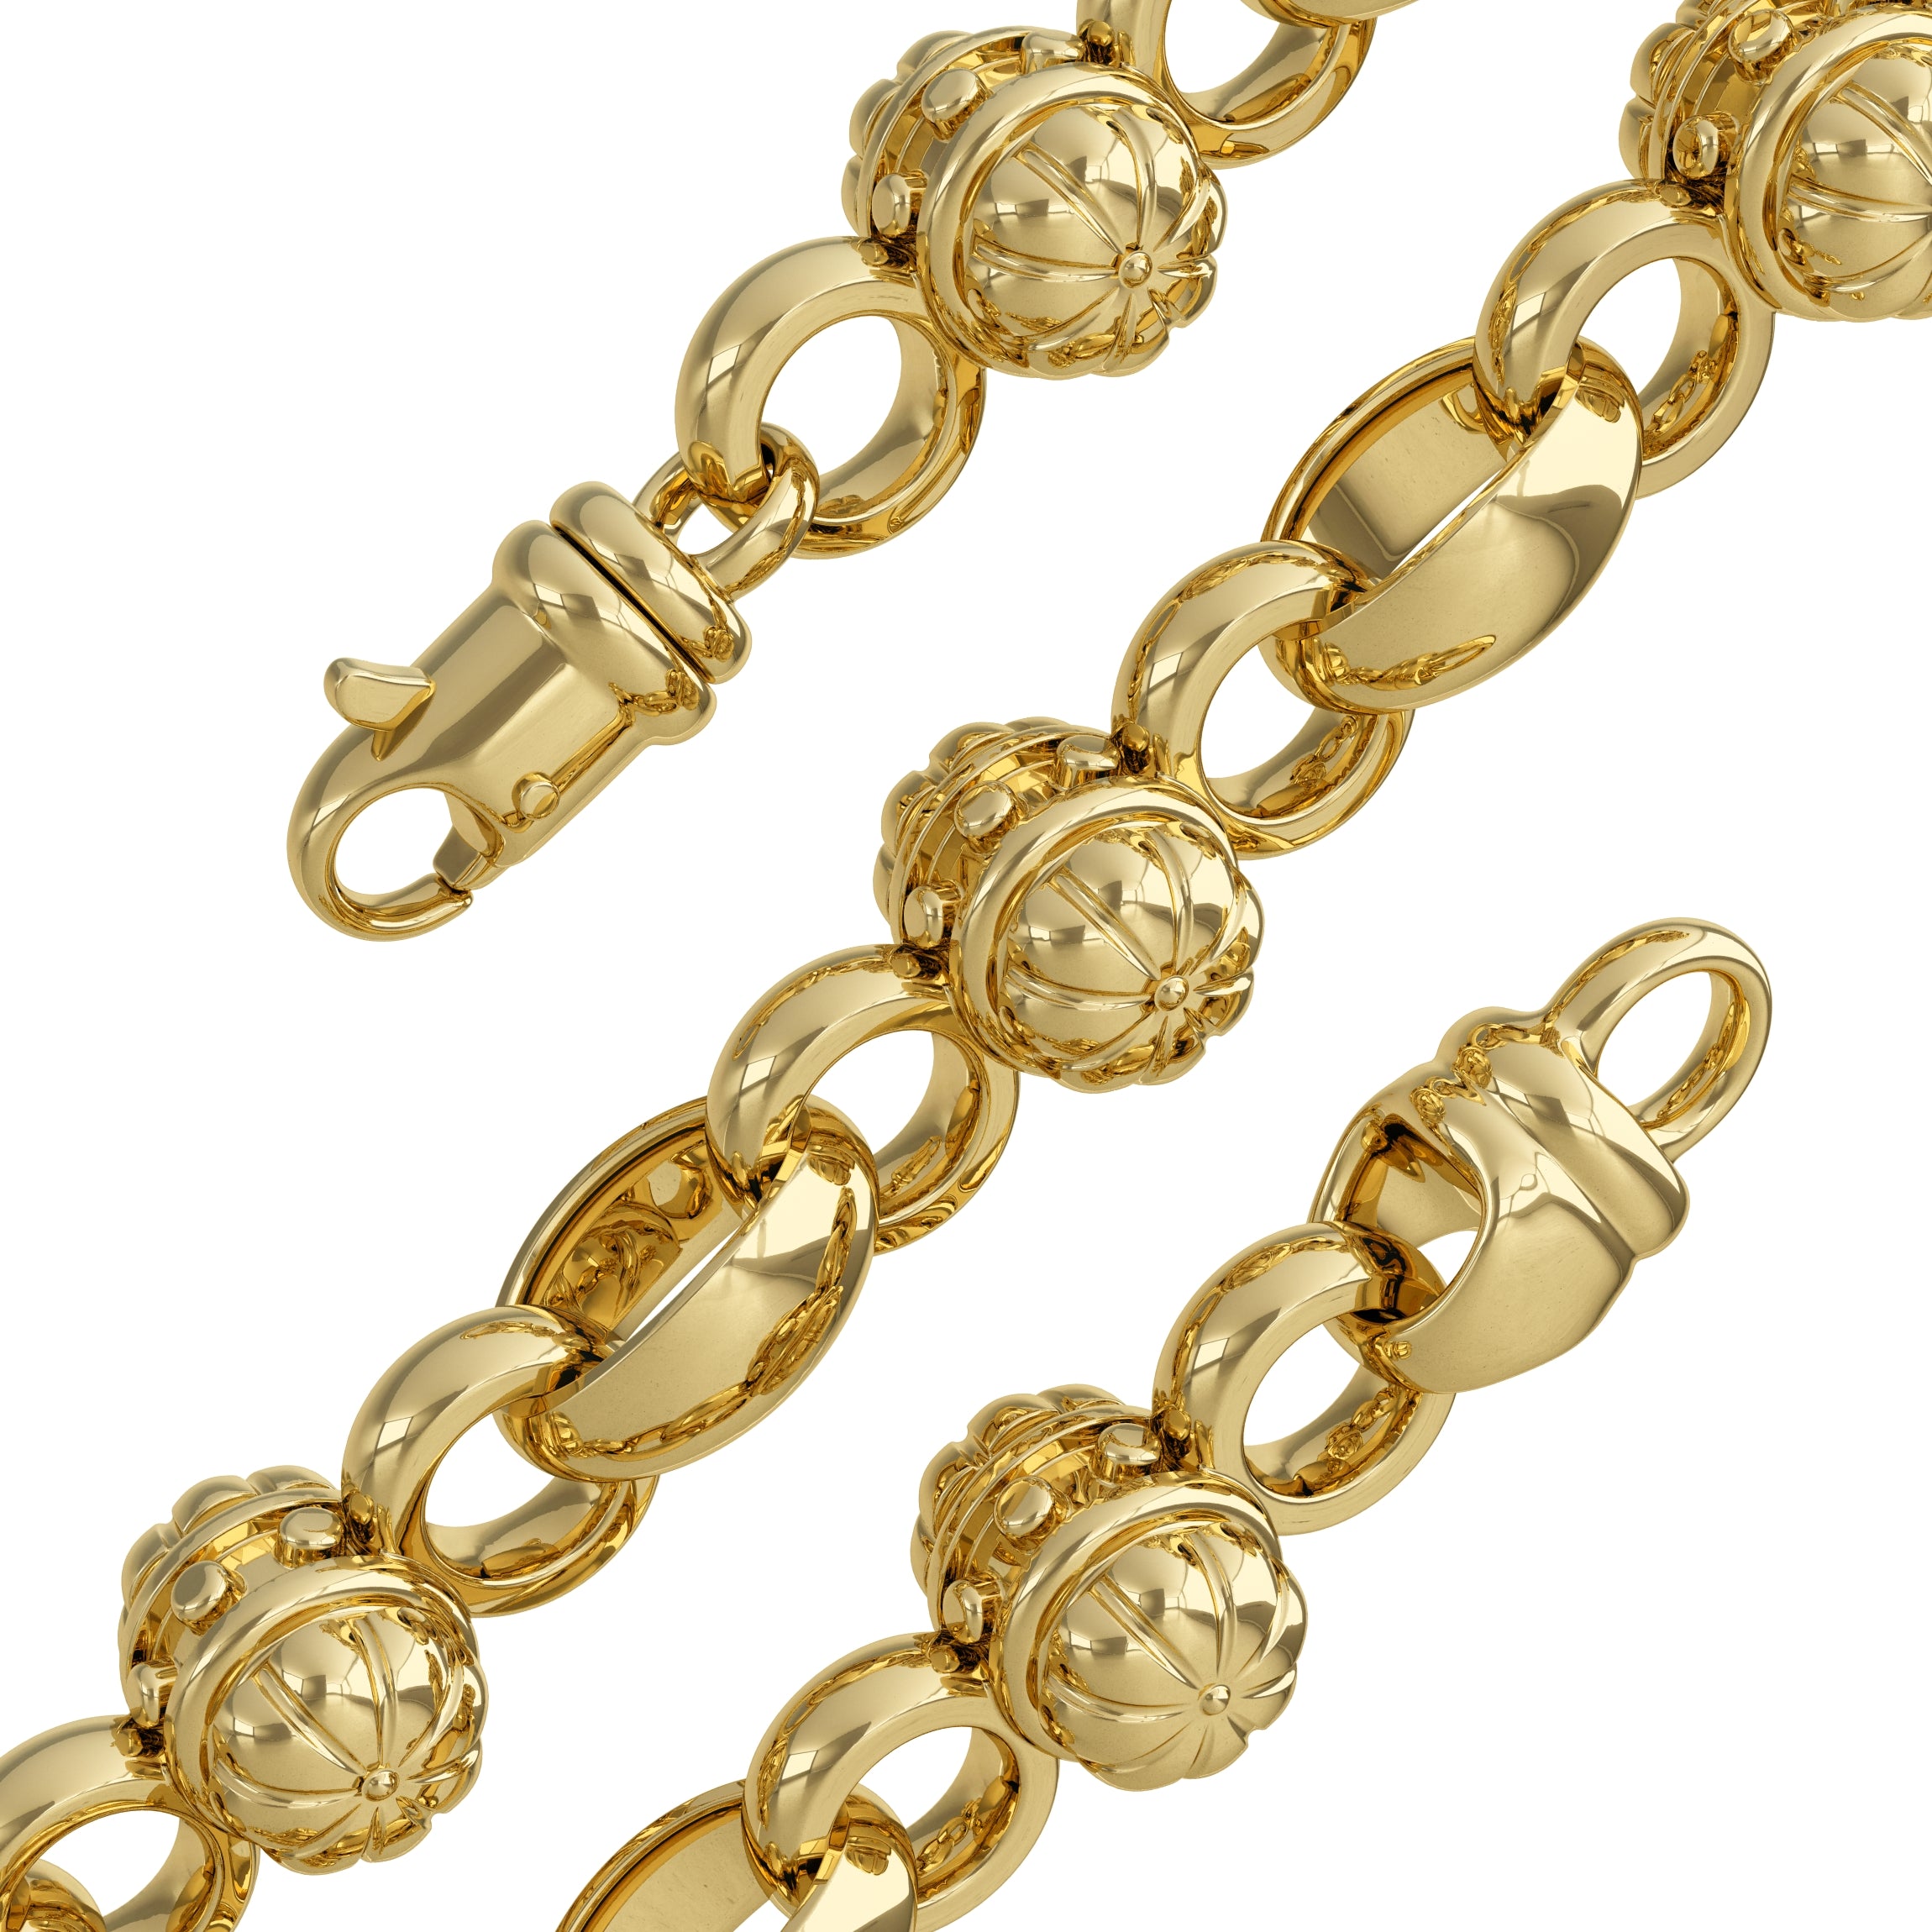 Flower Link Chain Necklace I Nautical Treasure Jewelry 10K Gold / 24 / Flower Link (6mm) by Nautical Treasure Jewelry